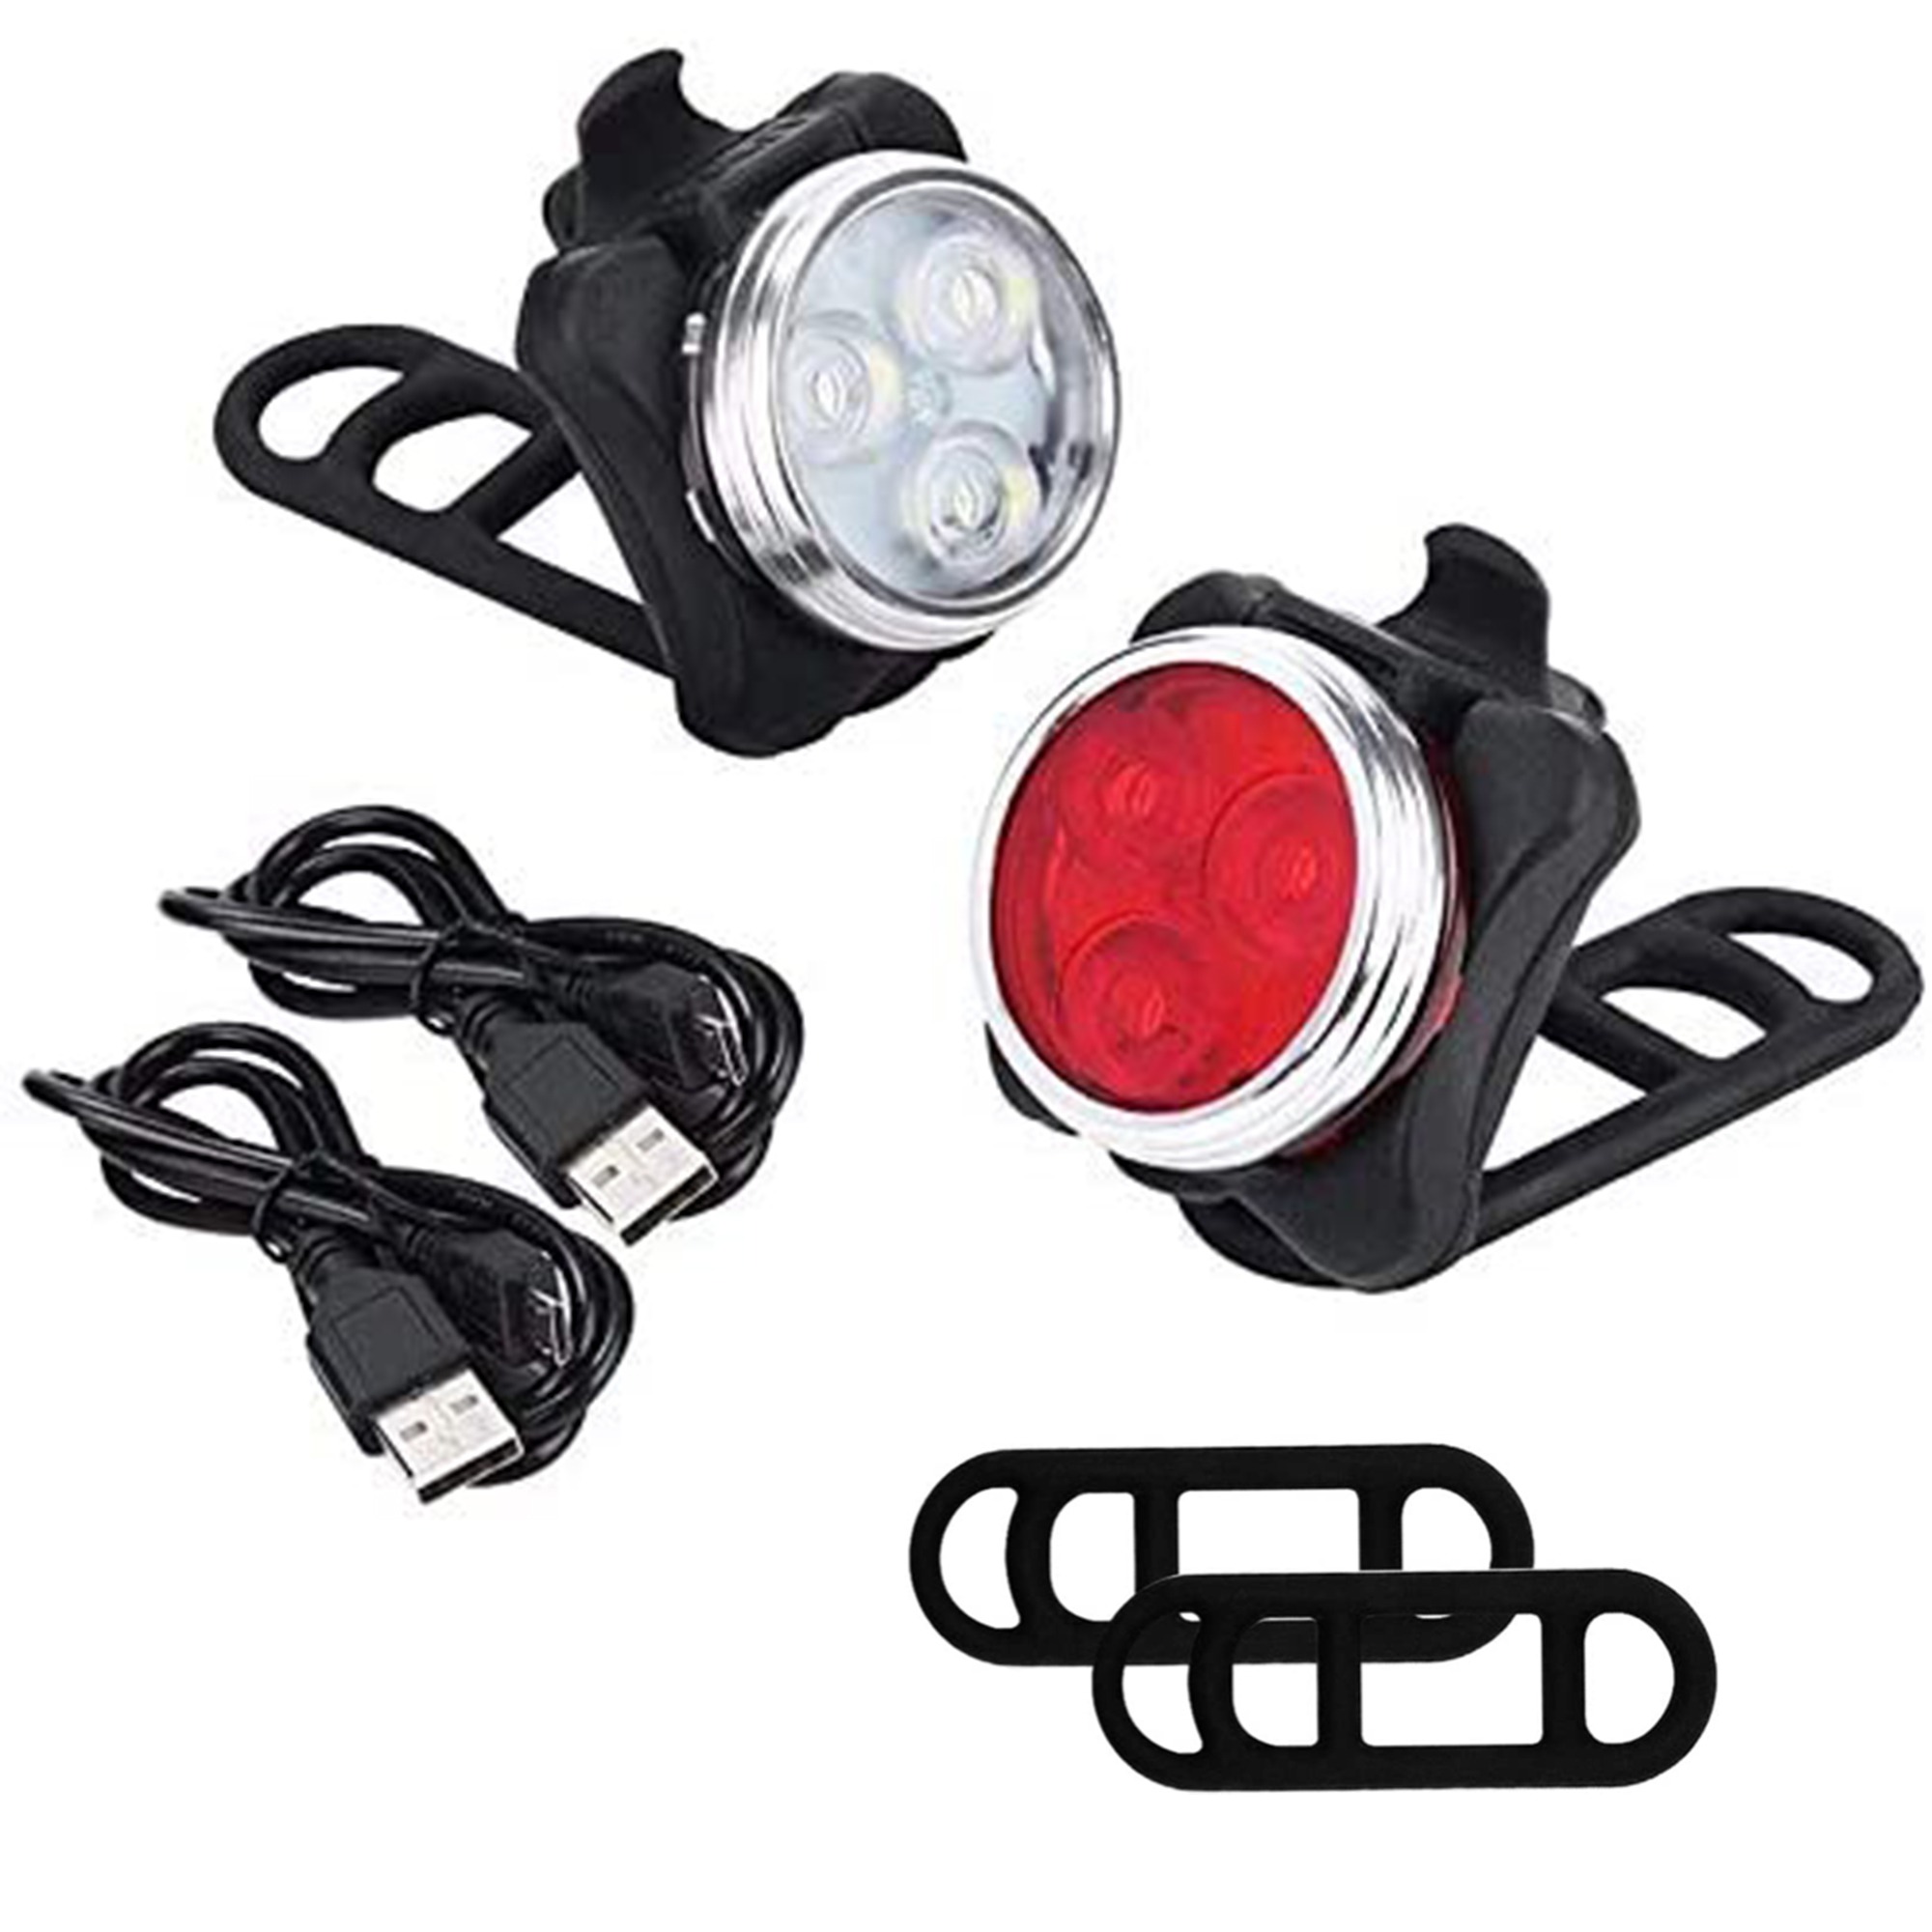 TINGDA Bike Light USB Rechargeable IPX5 Waterproof Bicycle LED Front and Back Rear Lights Super Bright Bike Front Light 3000 mAh for Mountain/City/Kids/Men/Women Road Cycling Safety Flashlight